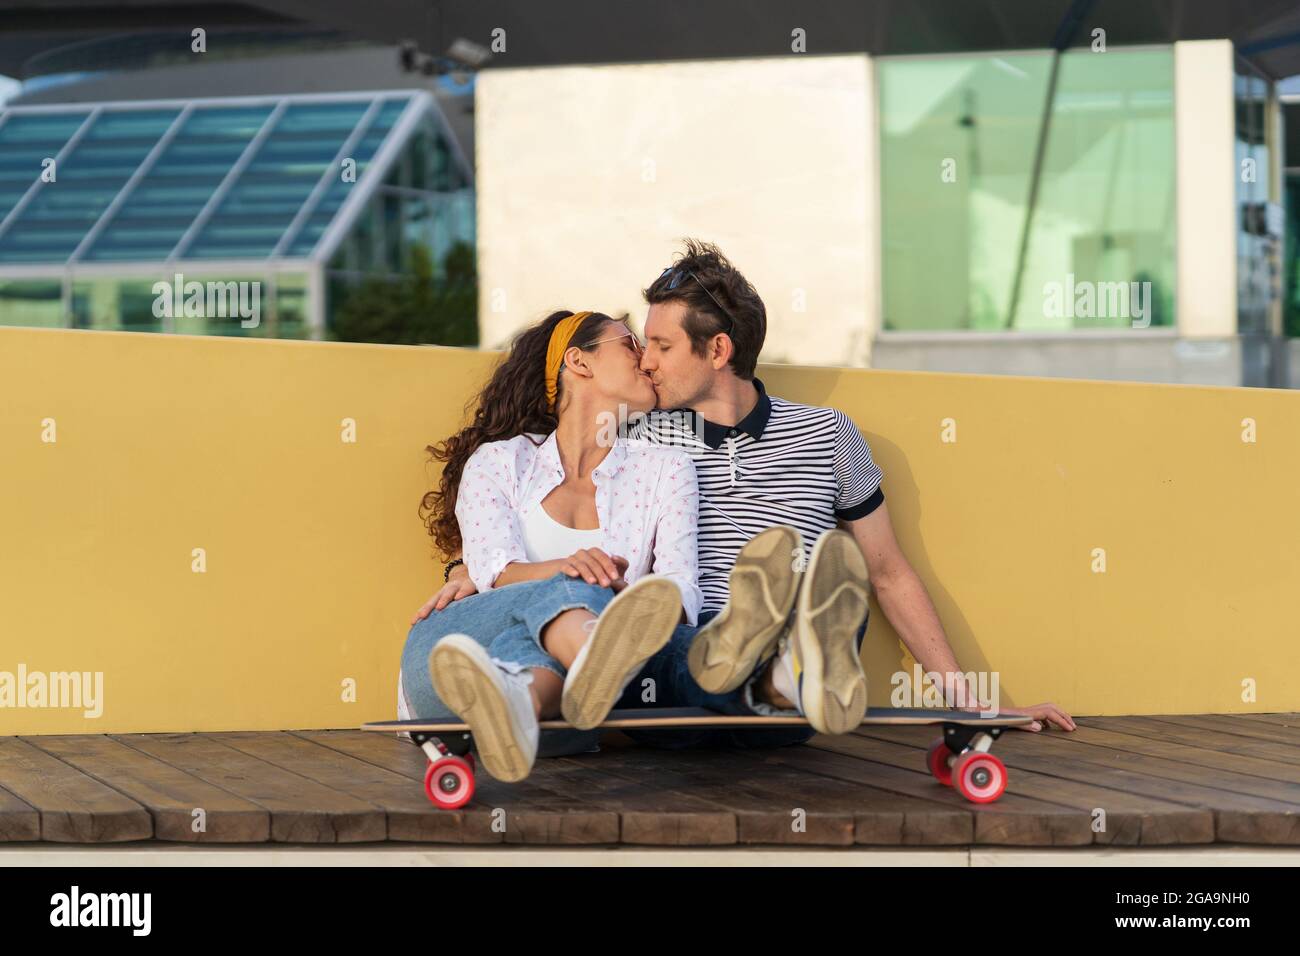 Couple of skaters kissing sit on longboard together outdoors in urban space. Youth, romance and love Stock Photo